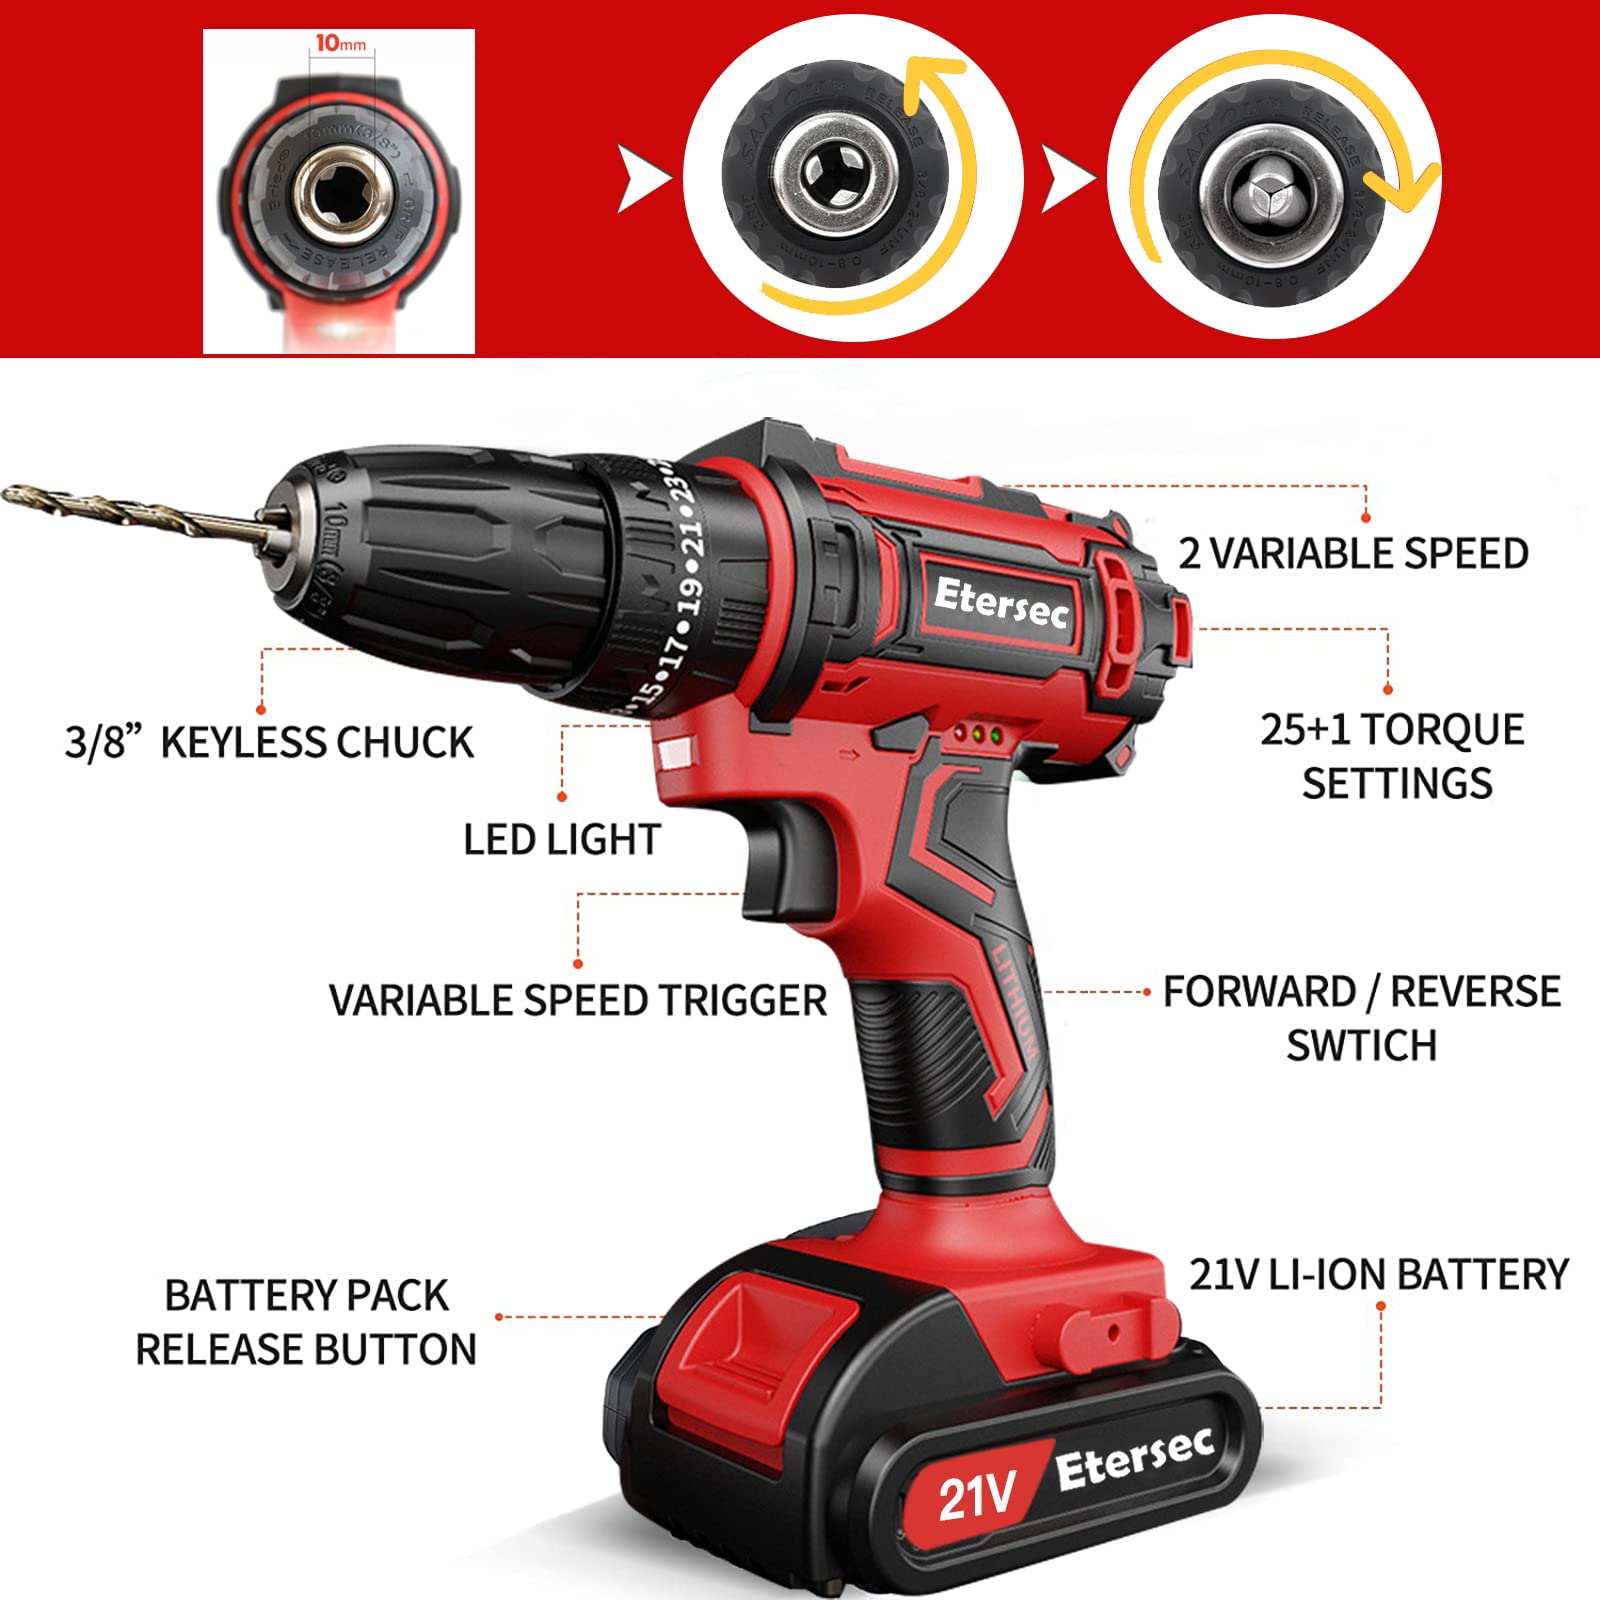 Cordless Drills Set 21V Electric Power Drill Kit with 2 Lithium-ion Batteries and 1 Fast Charger 3/8-Inch Keyless Chuck 2-Variable Speed 25+1 Torque Setting